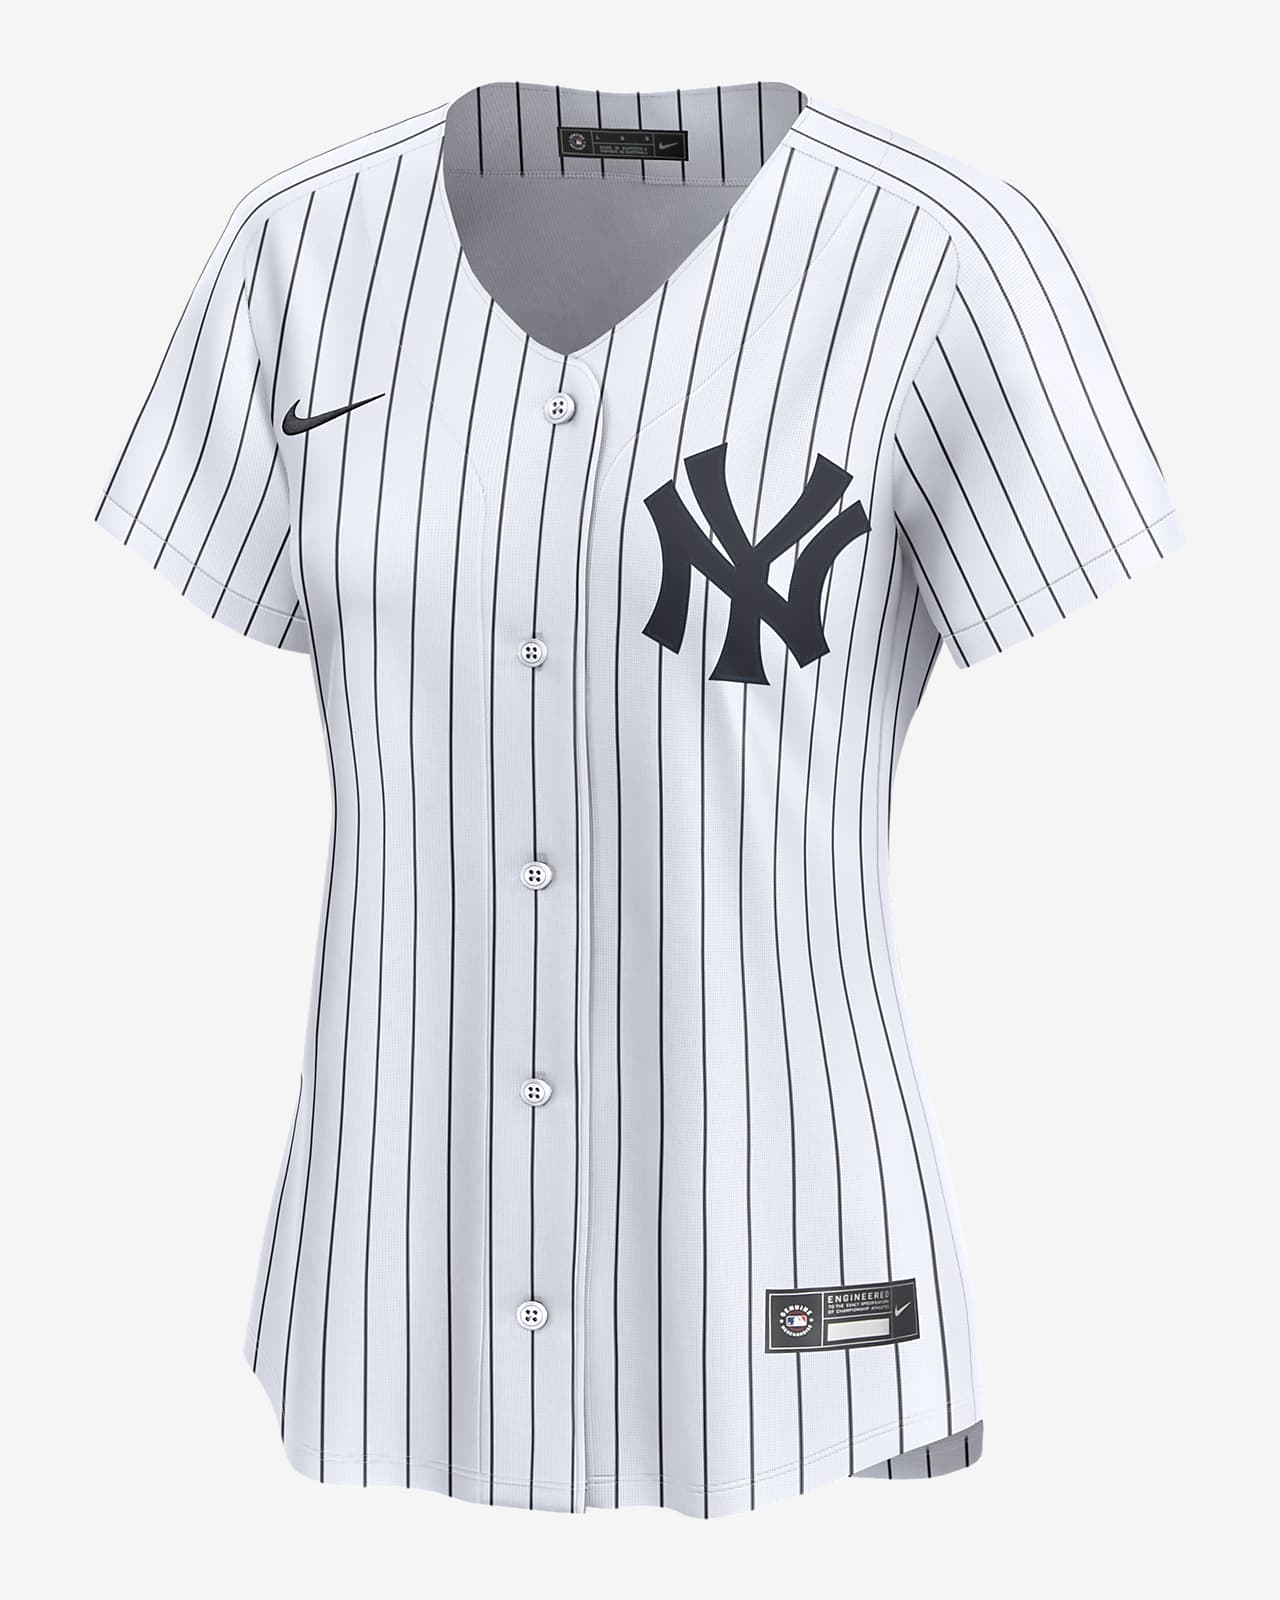 Anthony Volpe New York Yankees Women's Nike Dri-FIT ADV MLB Limited Jersey